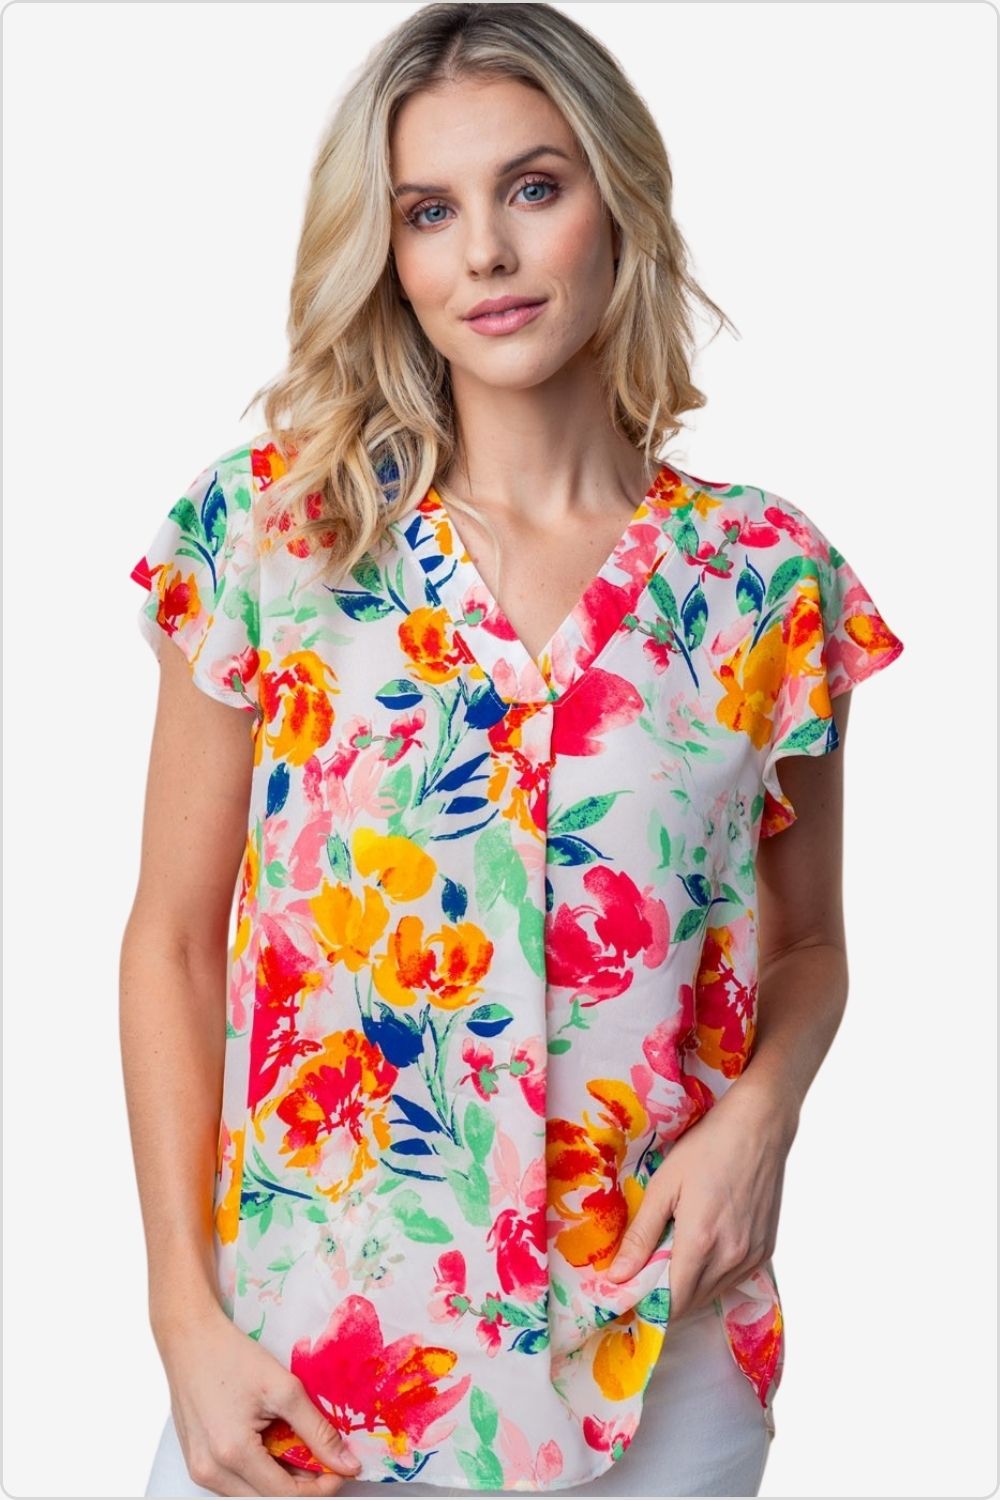 Stylish woman in a floral woven short sleeve top, perfect for both casual and formal settings, Color White Multi